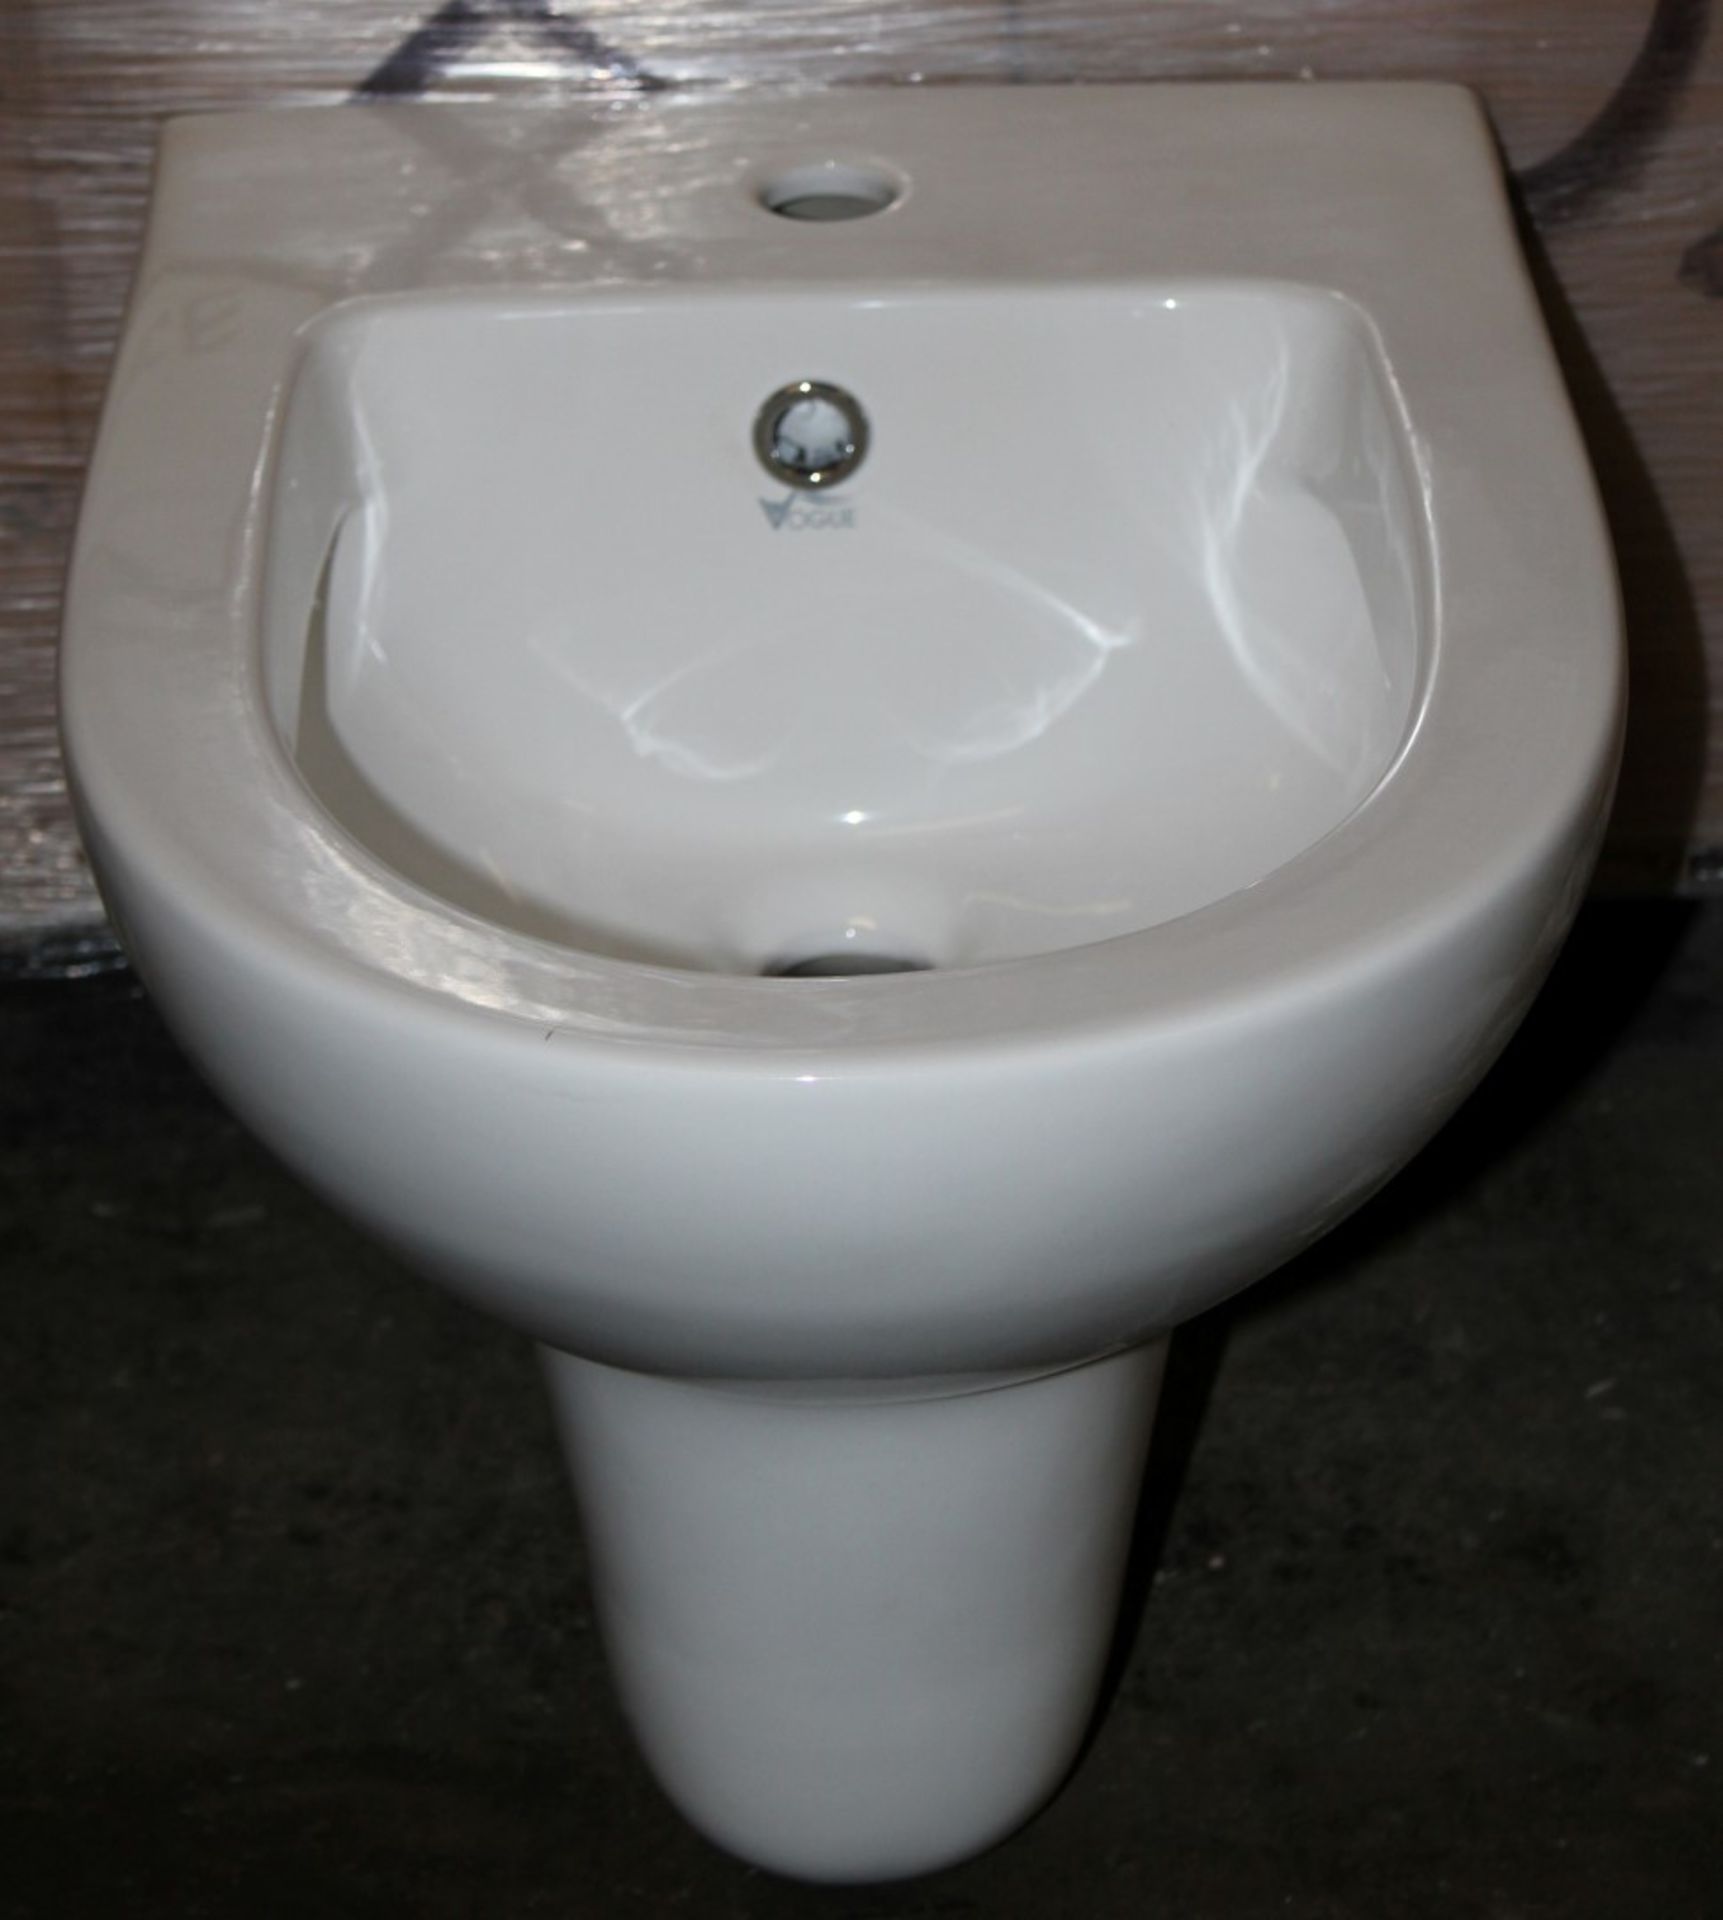 1 x Vogue Bathrooms KAMARA Single Tap Hole WALL HUNG BIDET - Brand New and Boxed - High Quality - Image 4 of 4